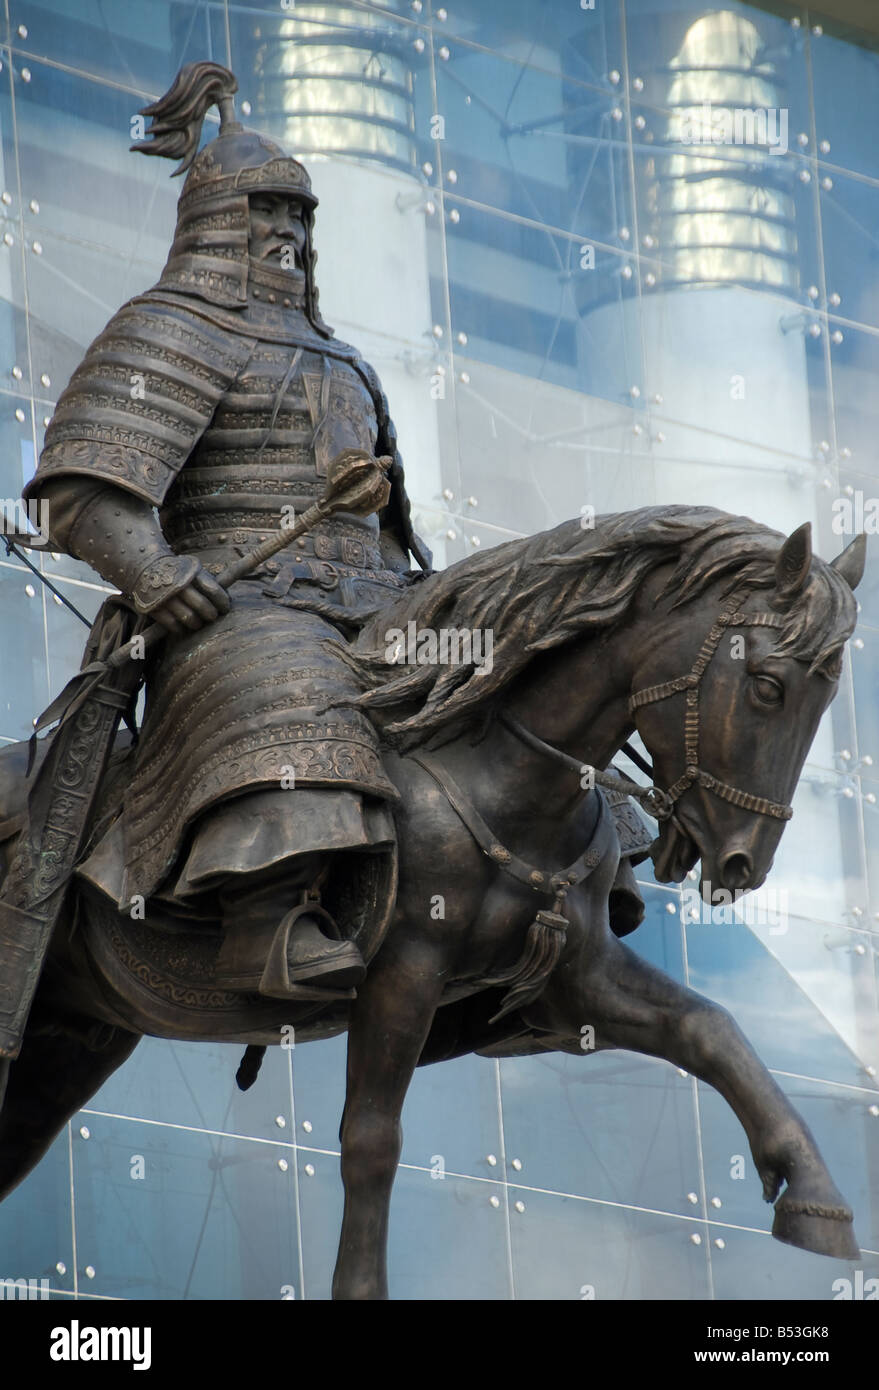 mongol-statue-at-the-parliament-building